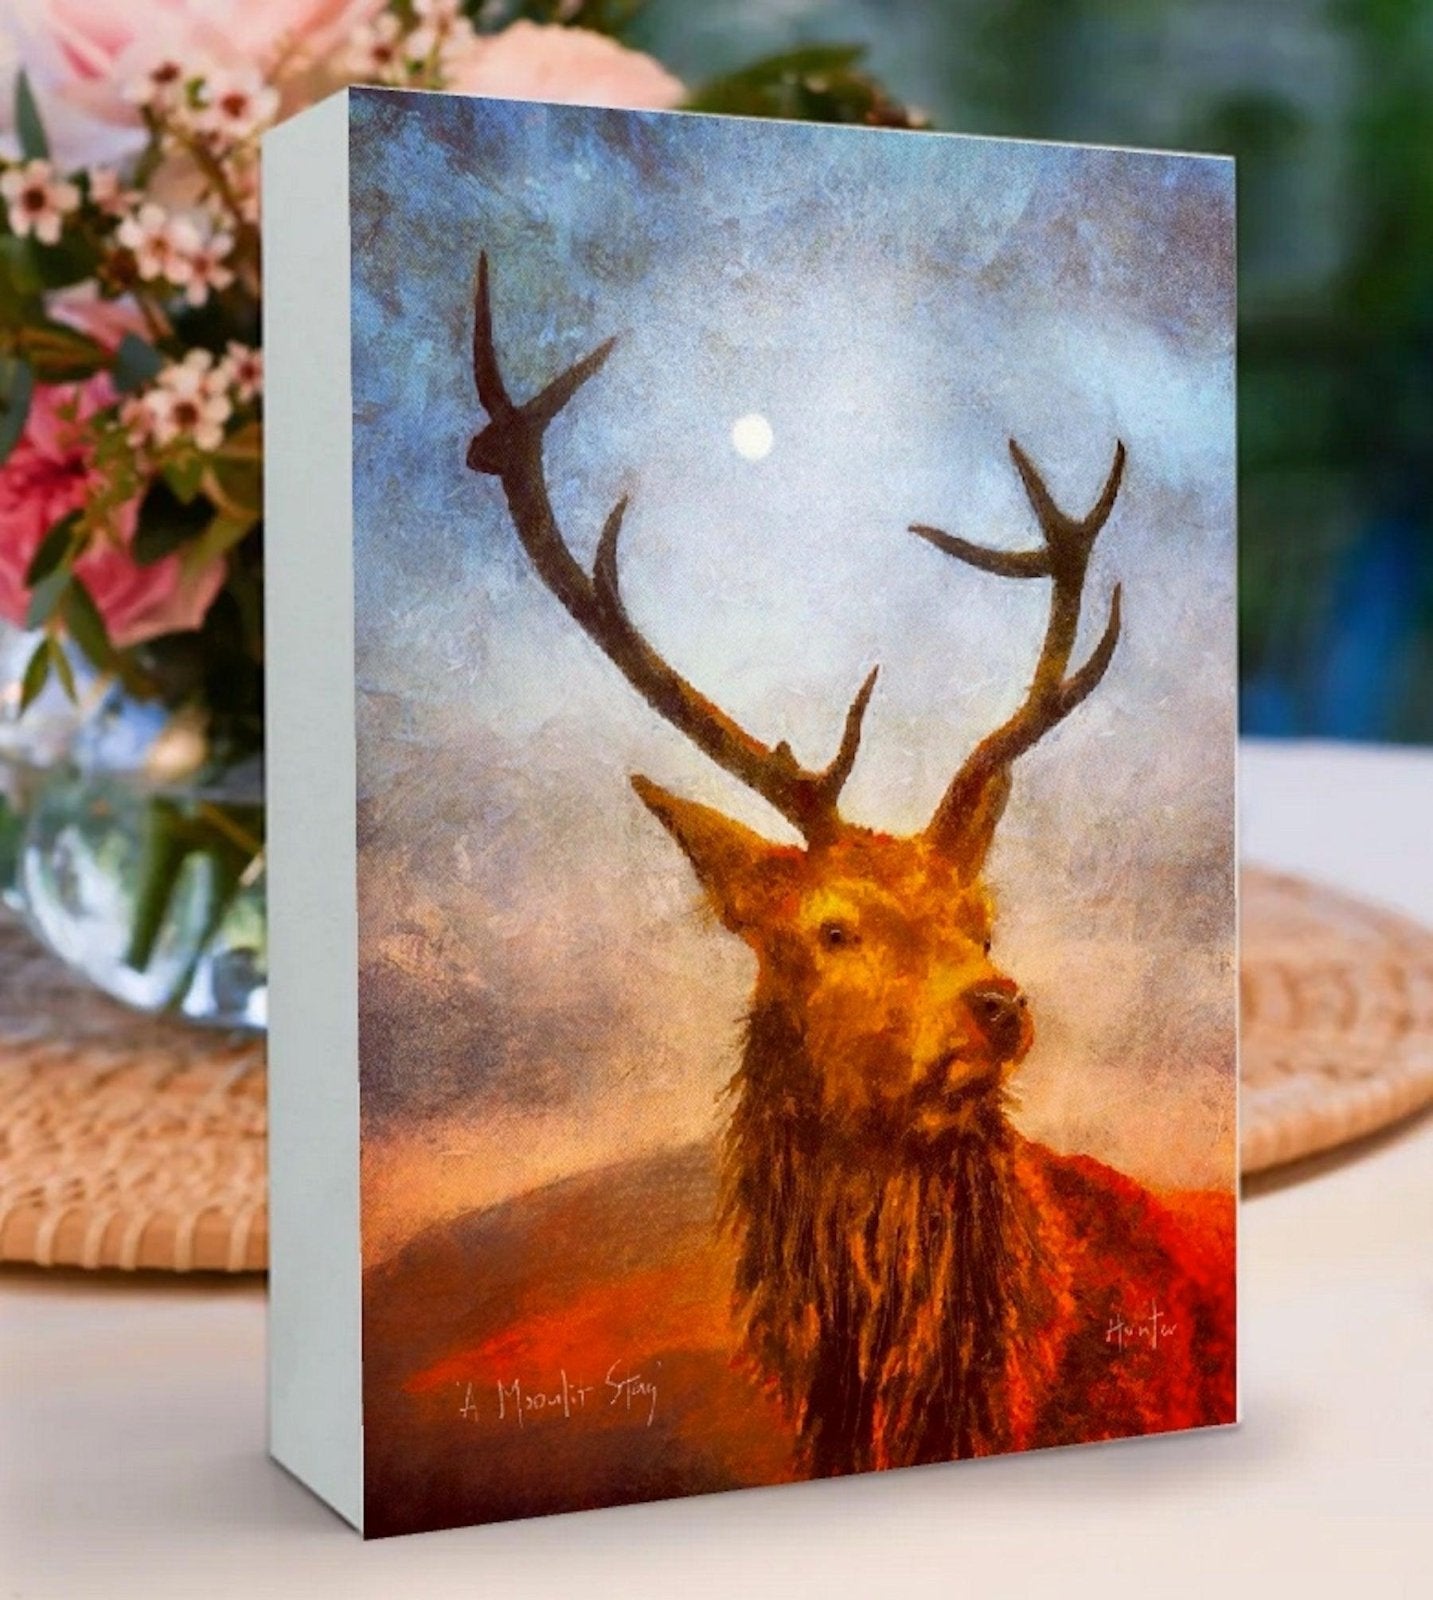 The Moonlit Mountain Stag Wooden Art Block-Wooden Art Blocks-Scottish Highlands & Lowlands Art Gallery-Paintings, Prints, Homeware, Art Gifts From Scotland By Scottish Artist Kevin Hunter